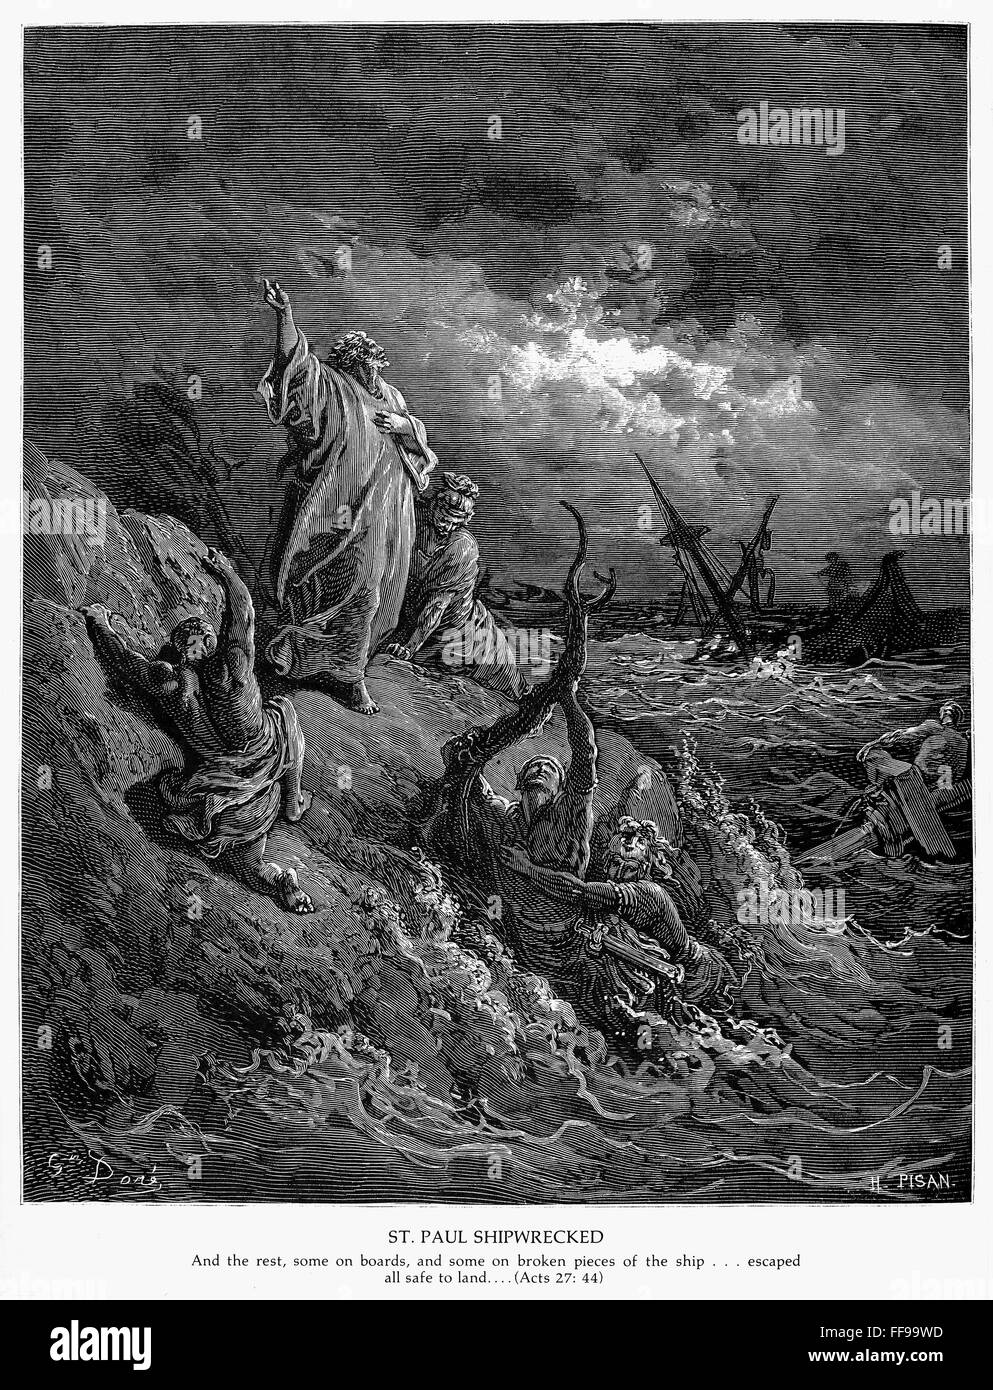 ST. PAUL: SHIPWRECK. /n(Acts 27:44). Wood engraving, 19th century, after Gustave DorΘ. Stock Photo